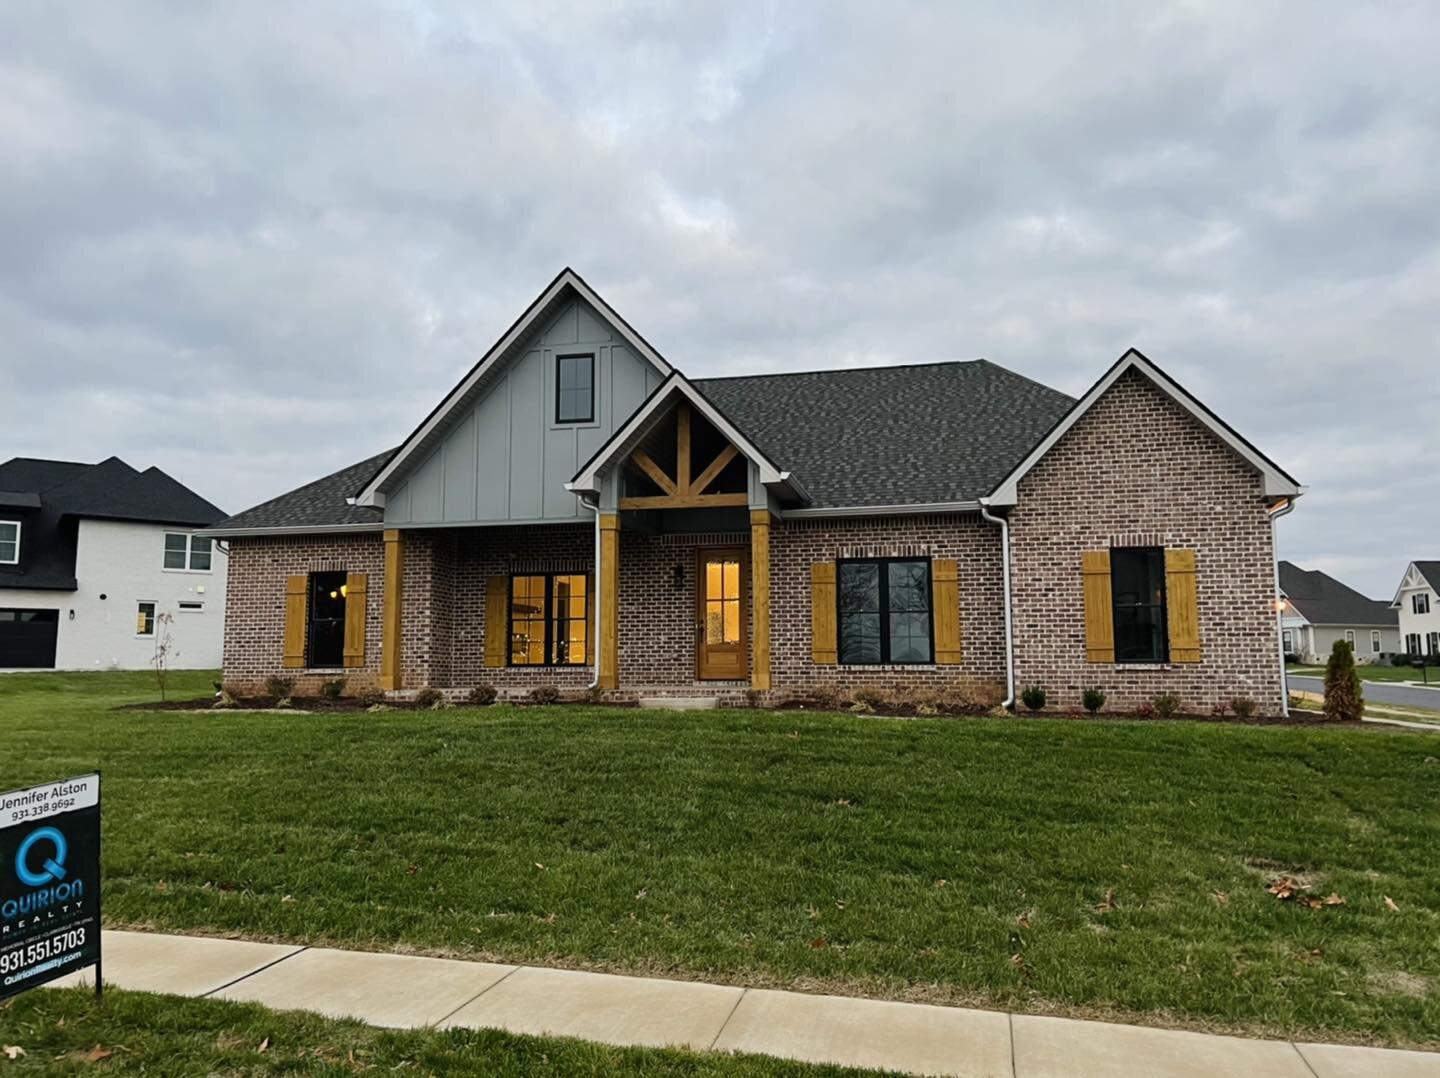 Lot 49 Whitewood is move-in ready for the holidays!
 
4 beds/ 3 baths + bonus room
-Mother-in-law suite with full bath/ bonus room upstairs
-Hardwood throughout main level

$688,600

We&rsquo;re now offering a 1 point buy-down and up to $16,000 in cl